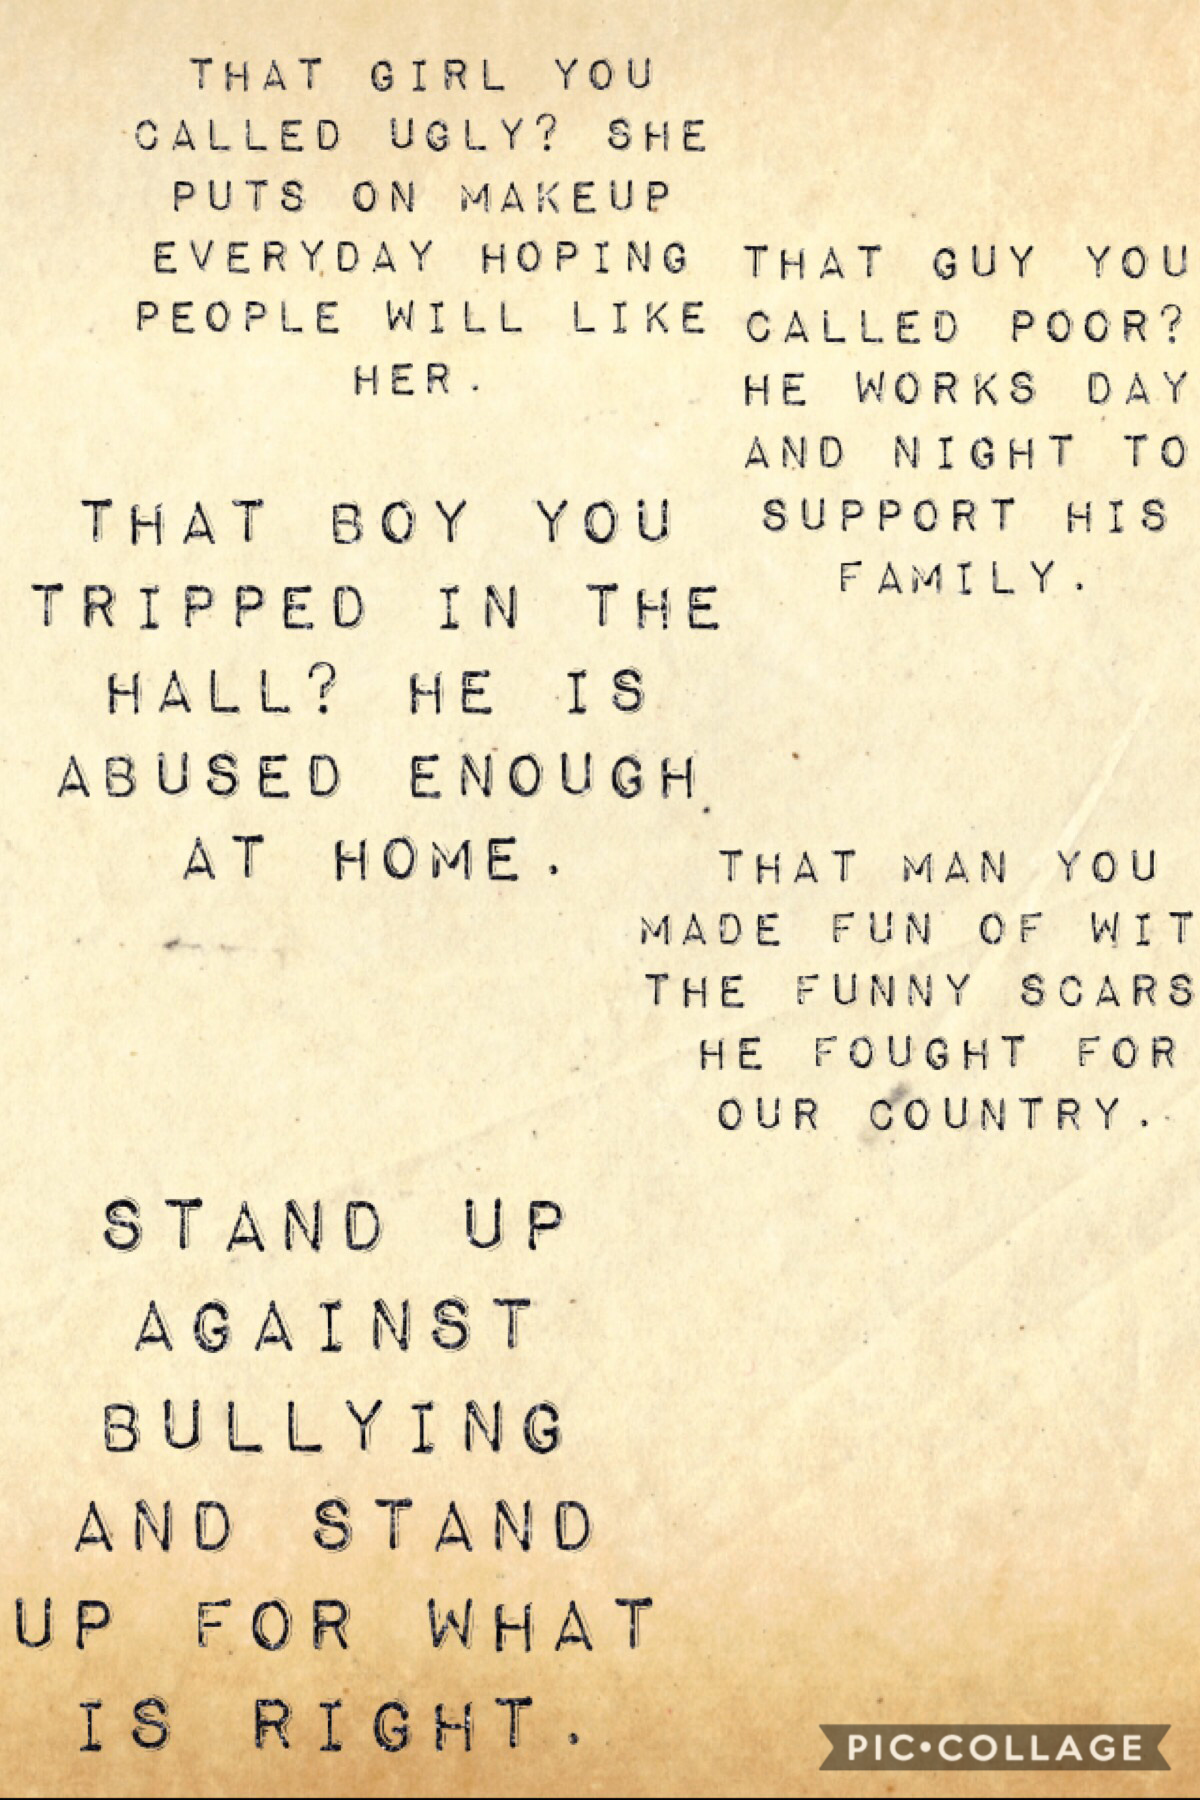 Stand up for the right thing. Like if you are against bullying.